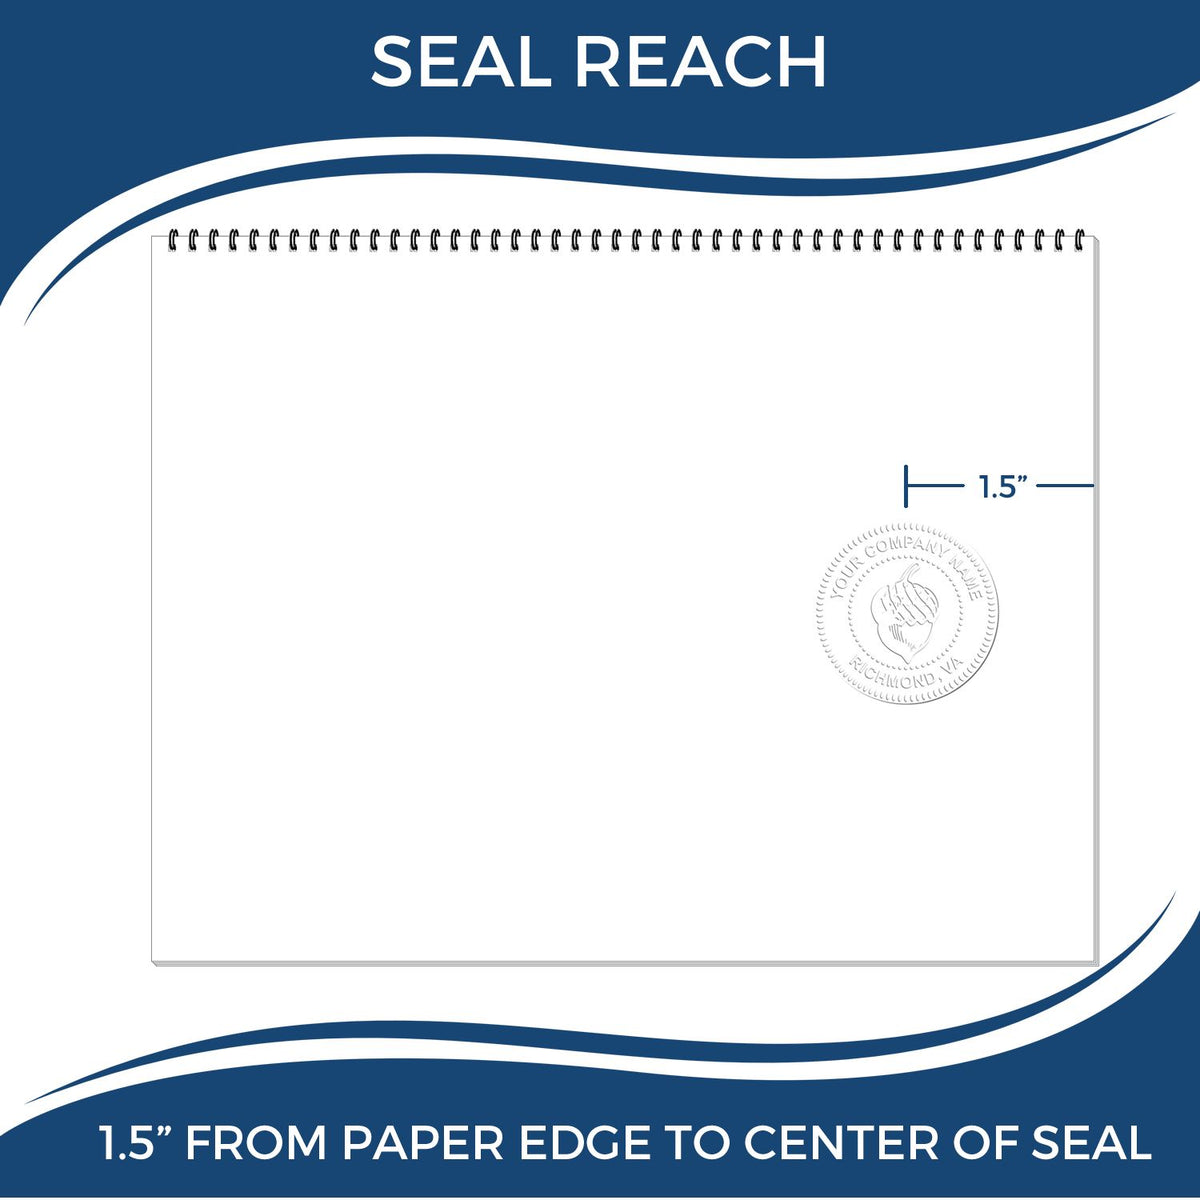 An infographic showing the seal reach which is represented by a ruler and a miniature seal image of the Soft Kentucky Professional Geologist Seal